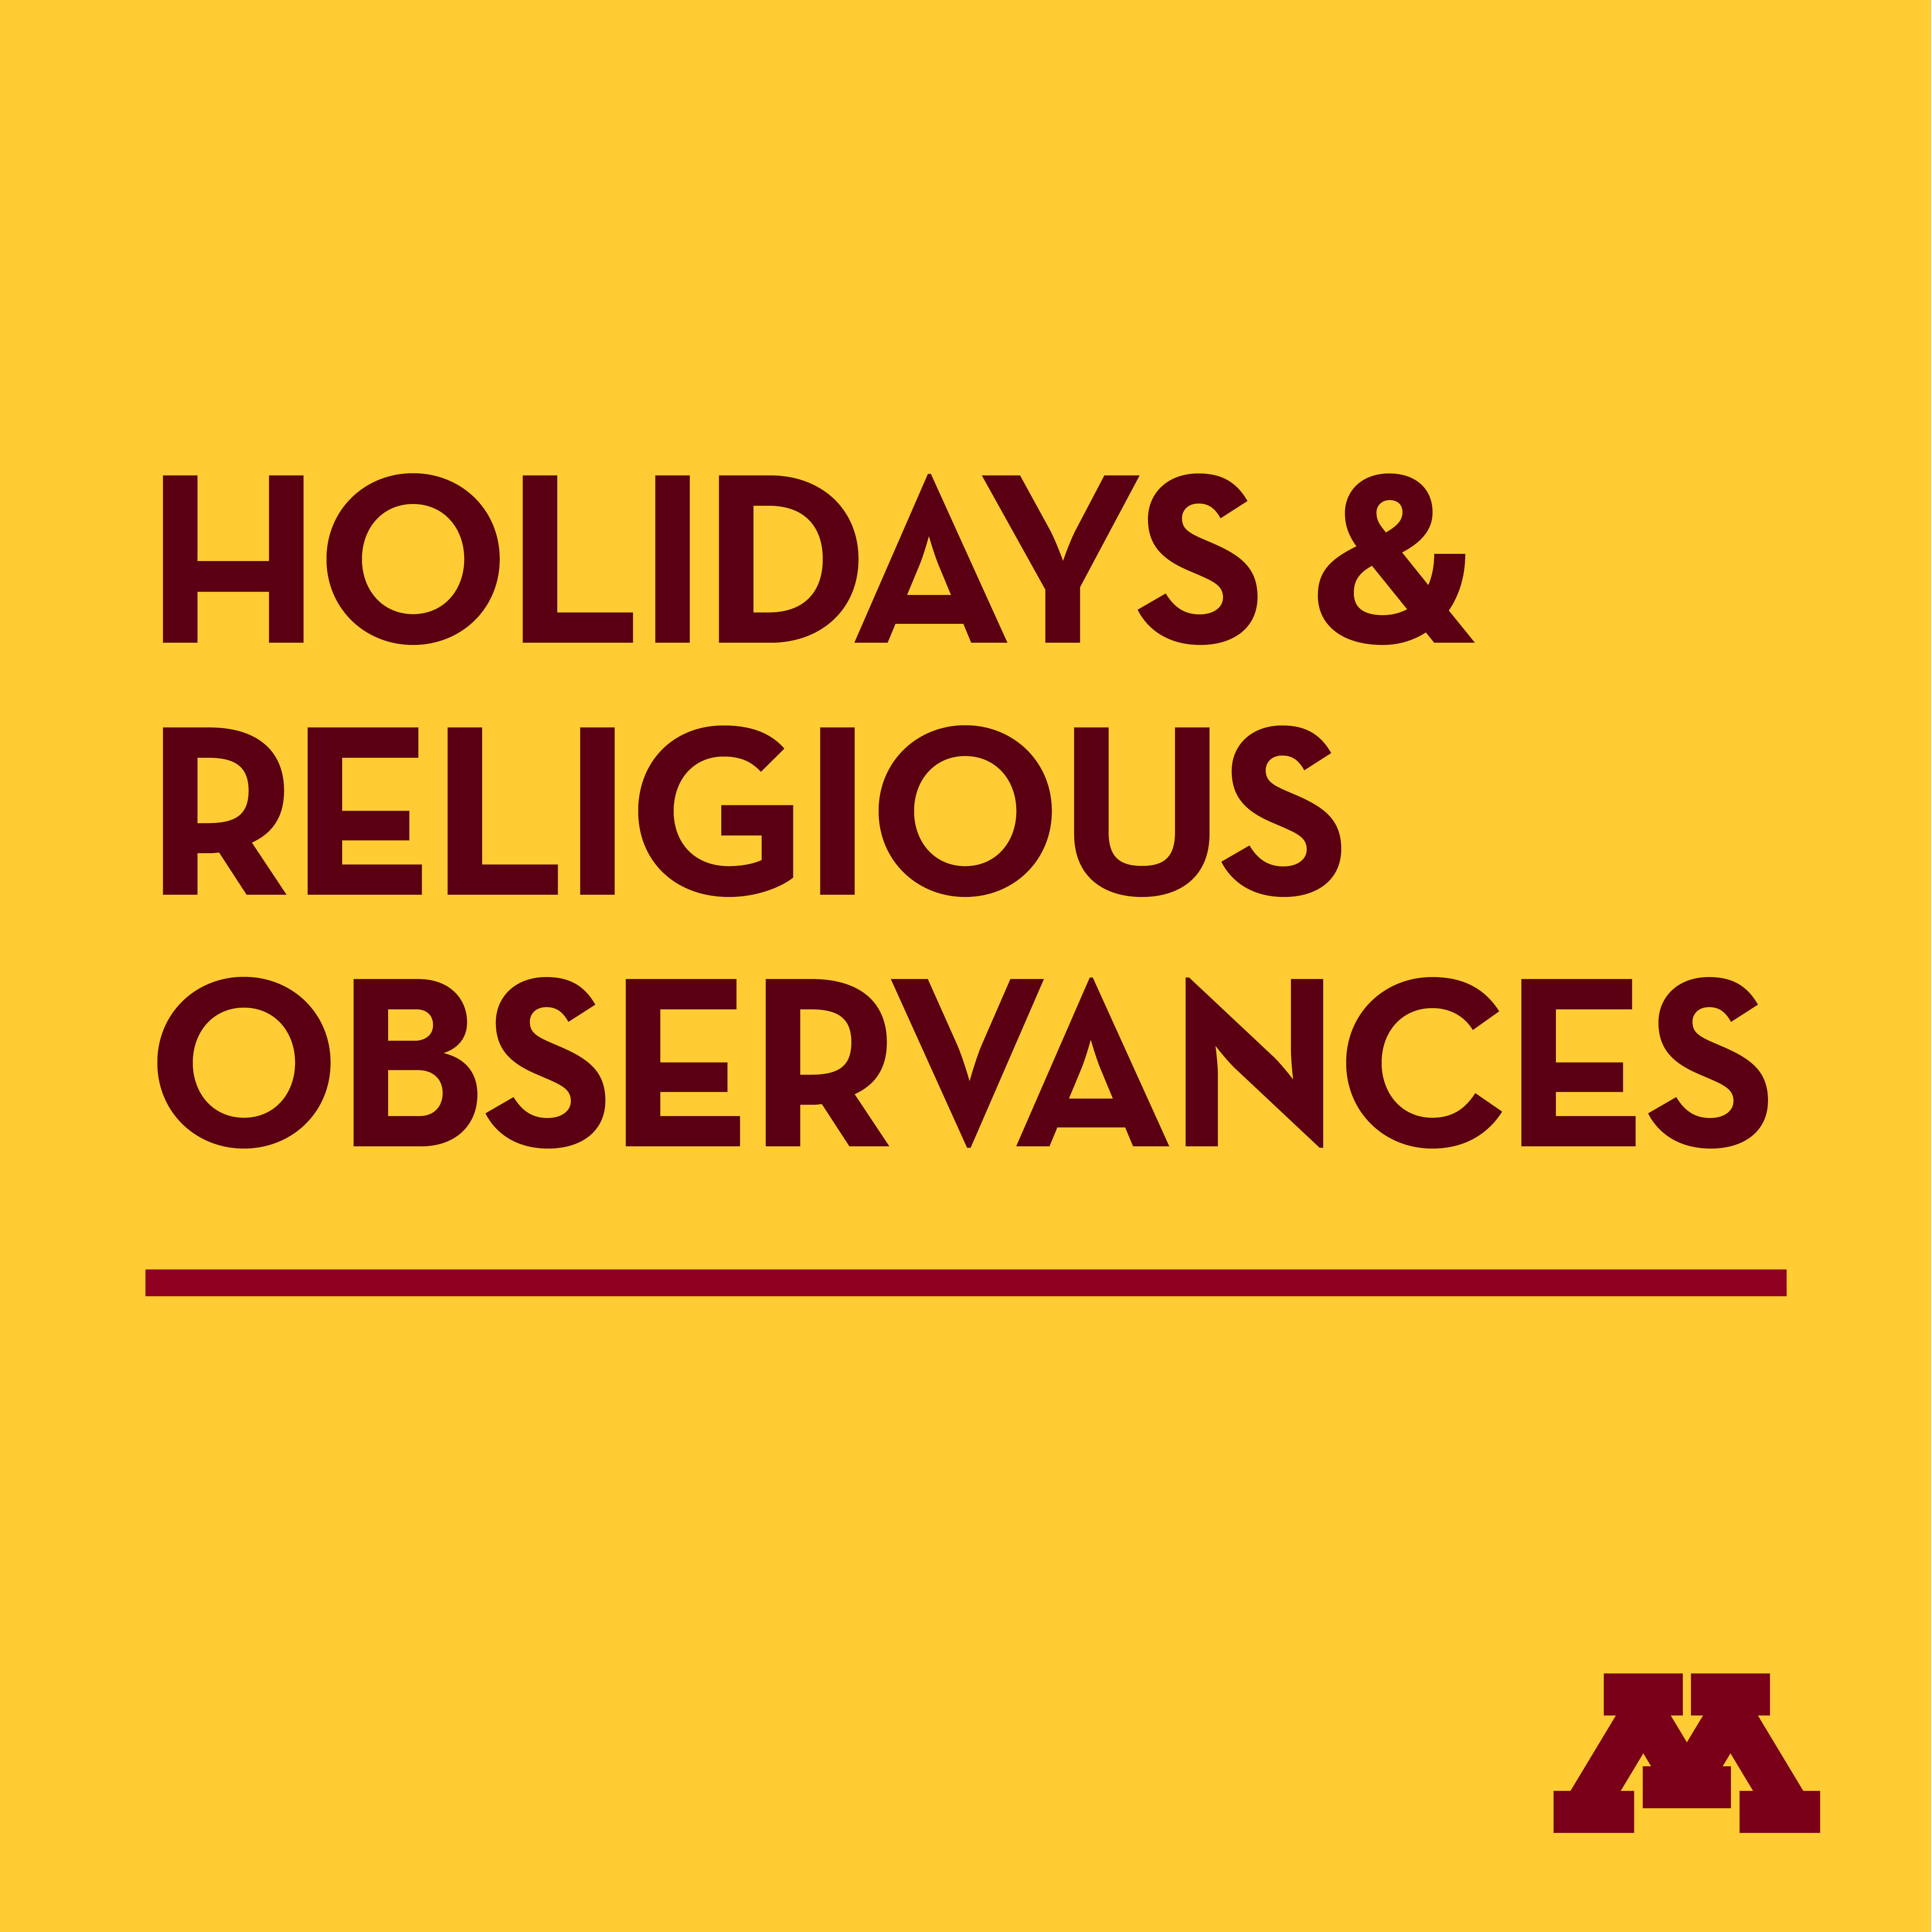 Holidays and Religious Observances